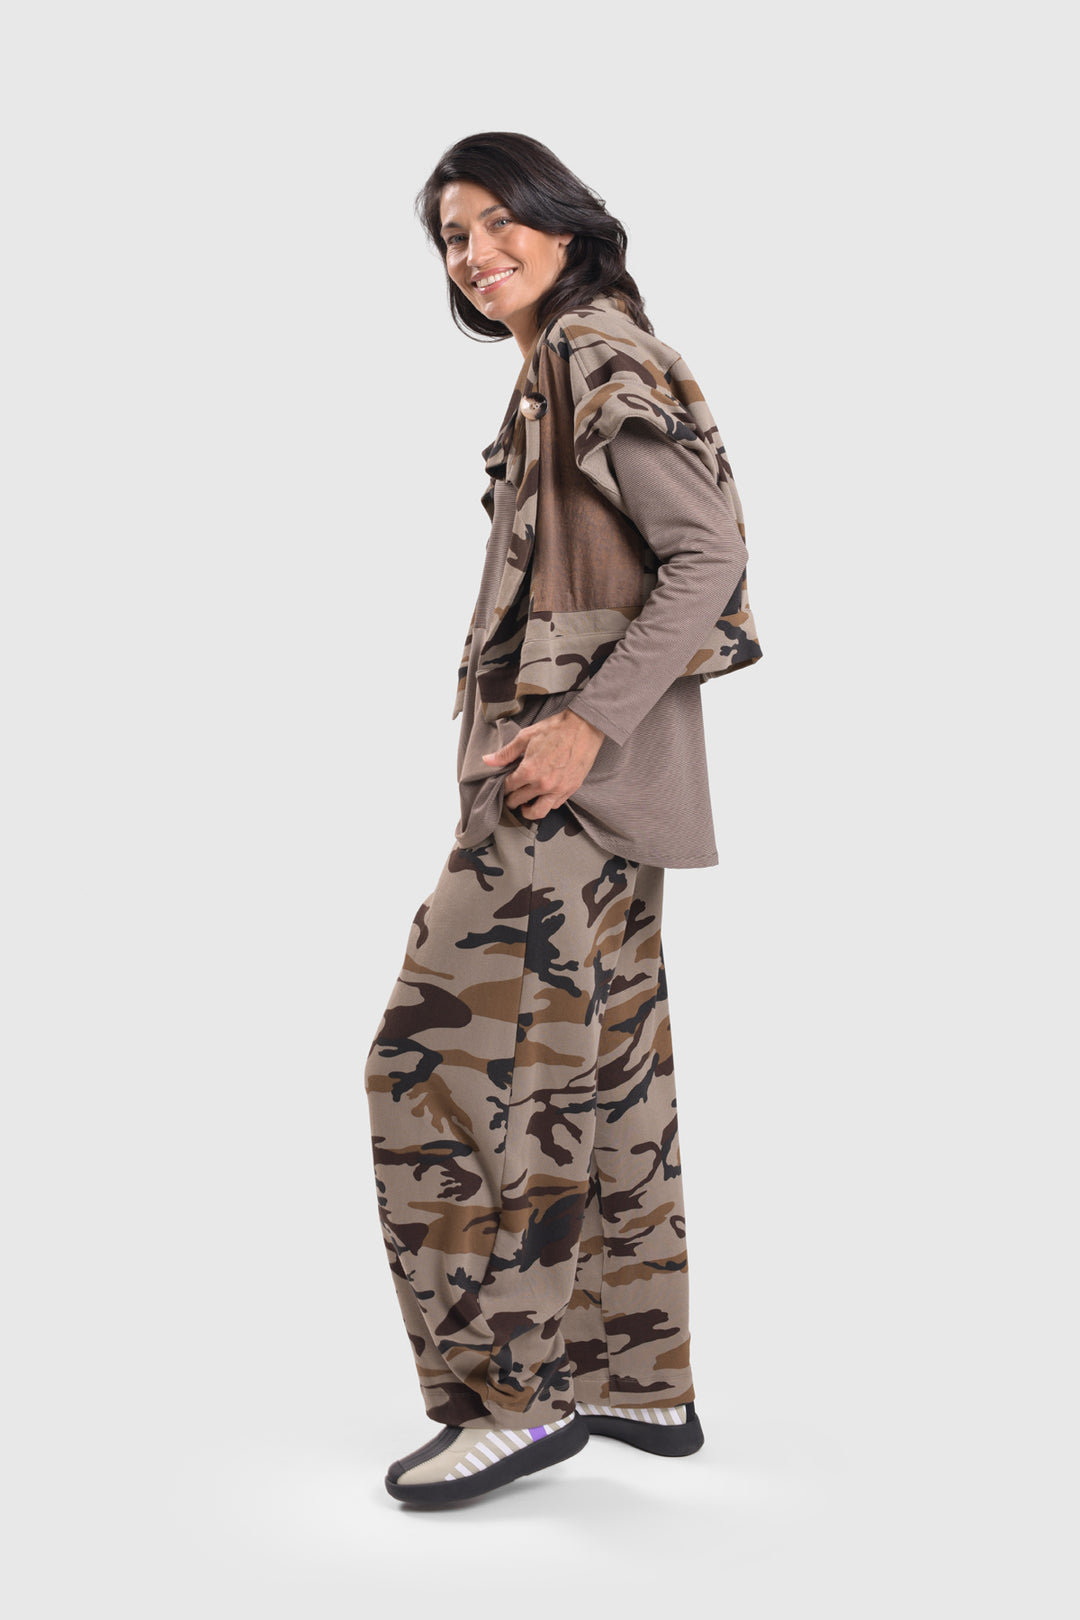 urban punto pants in brown color for women over 50